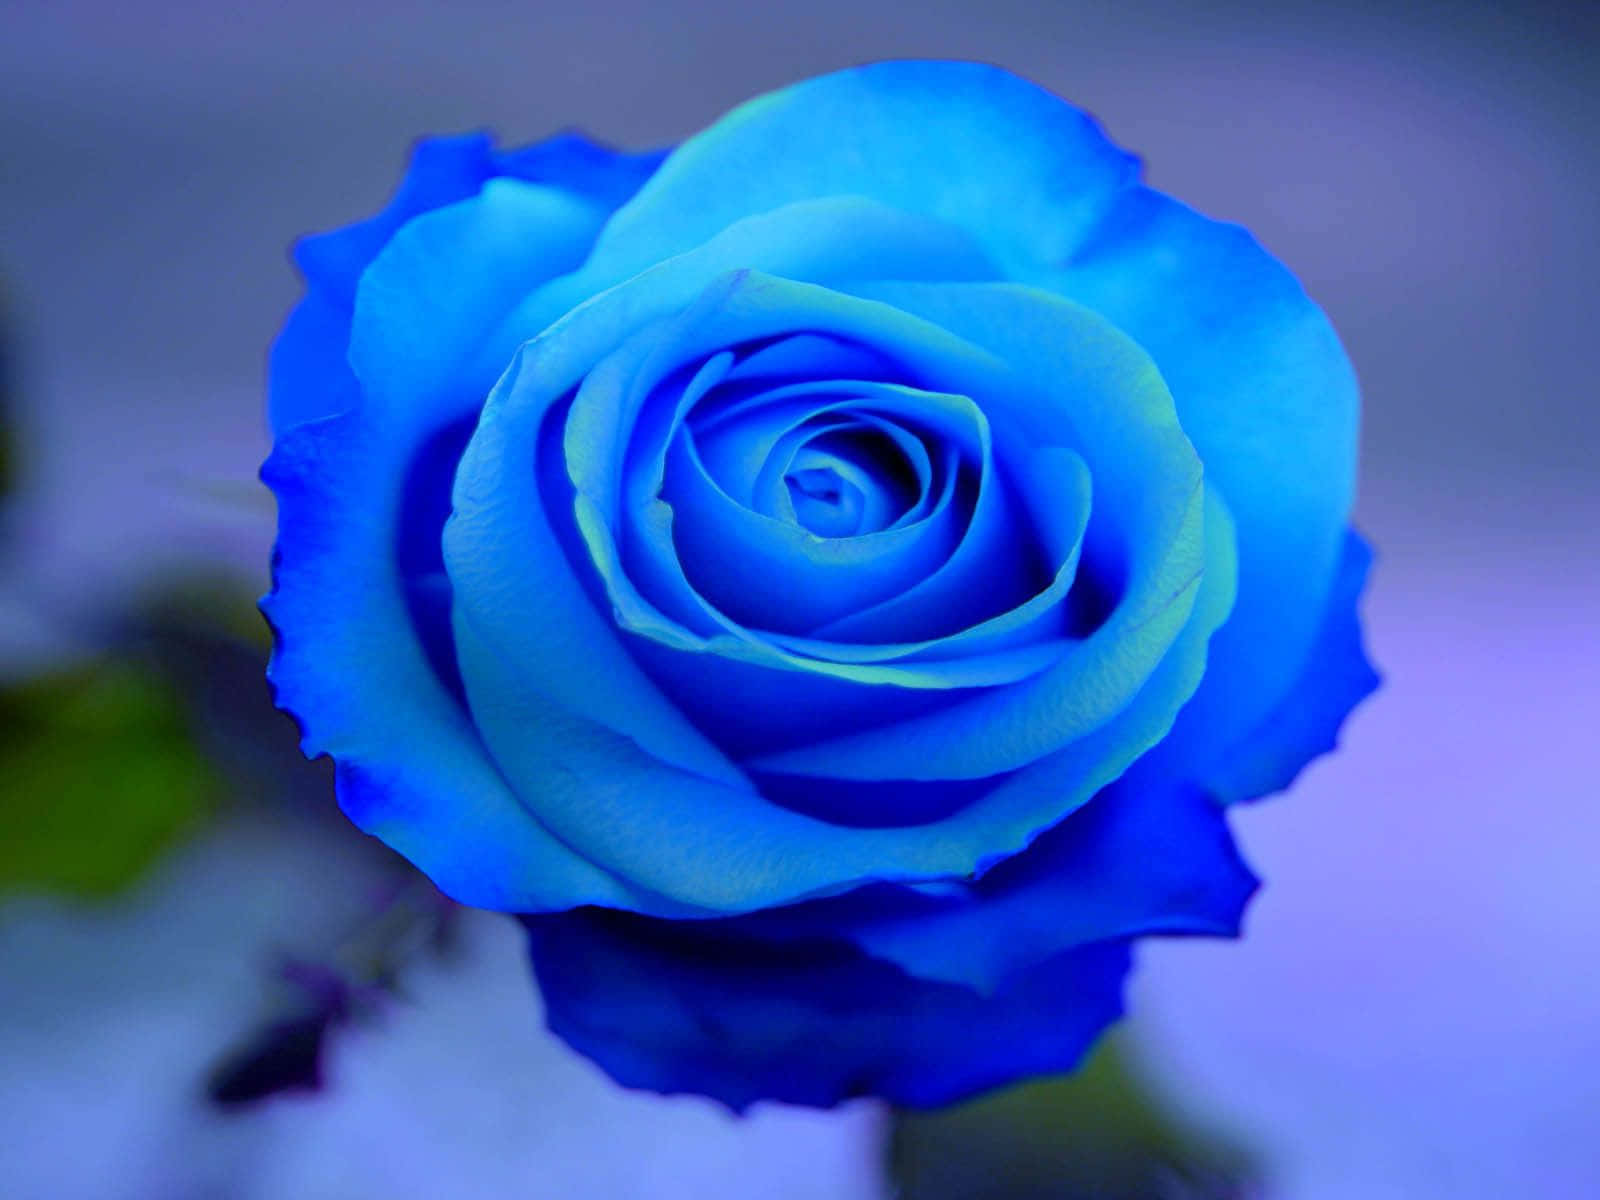 A stunning blue petaled rose surrounded by a soft black background. Wallpaper